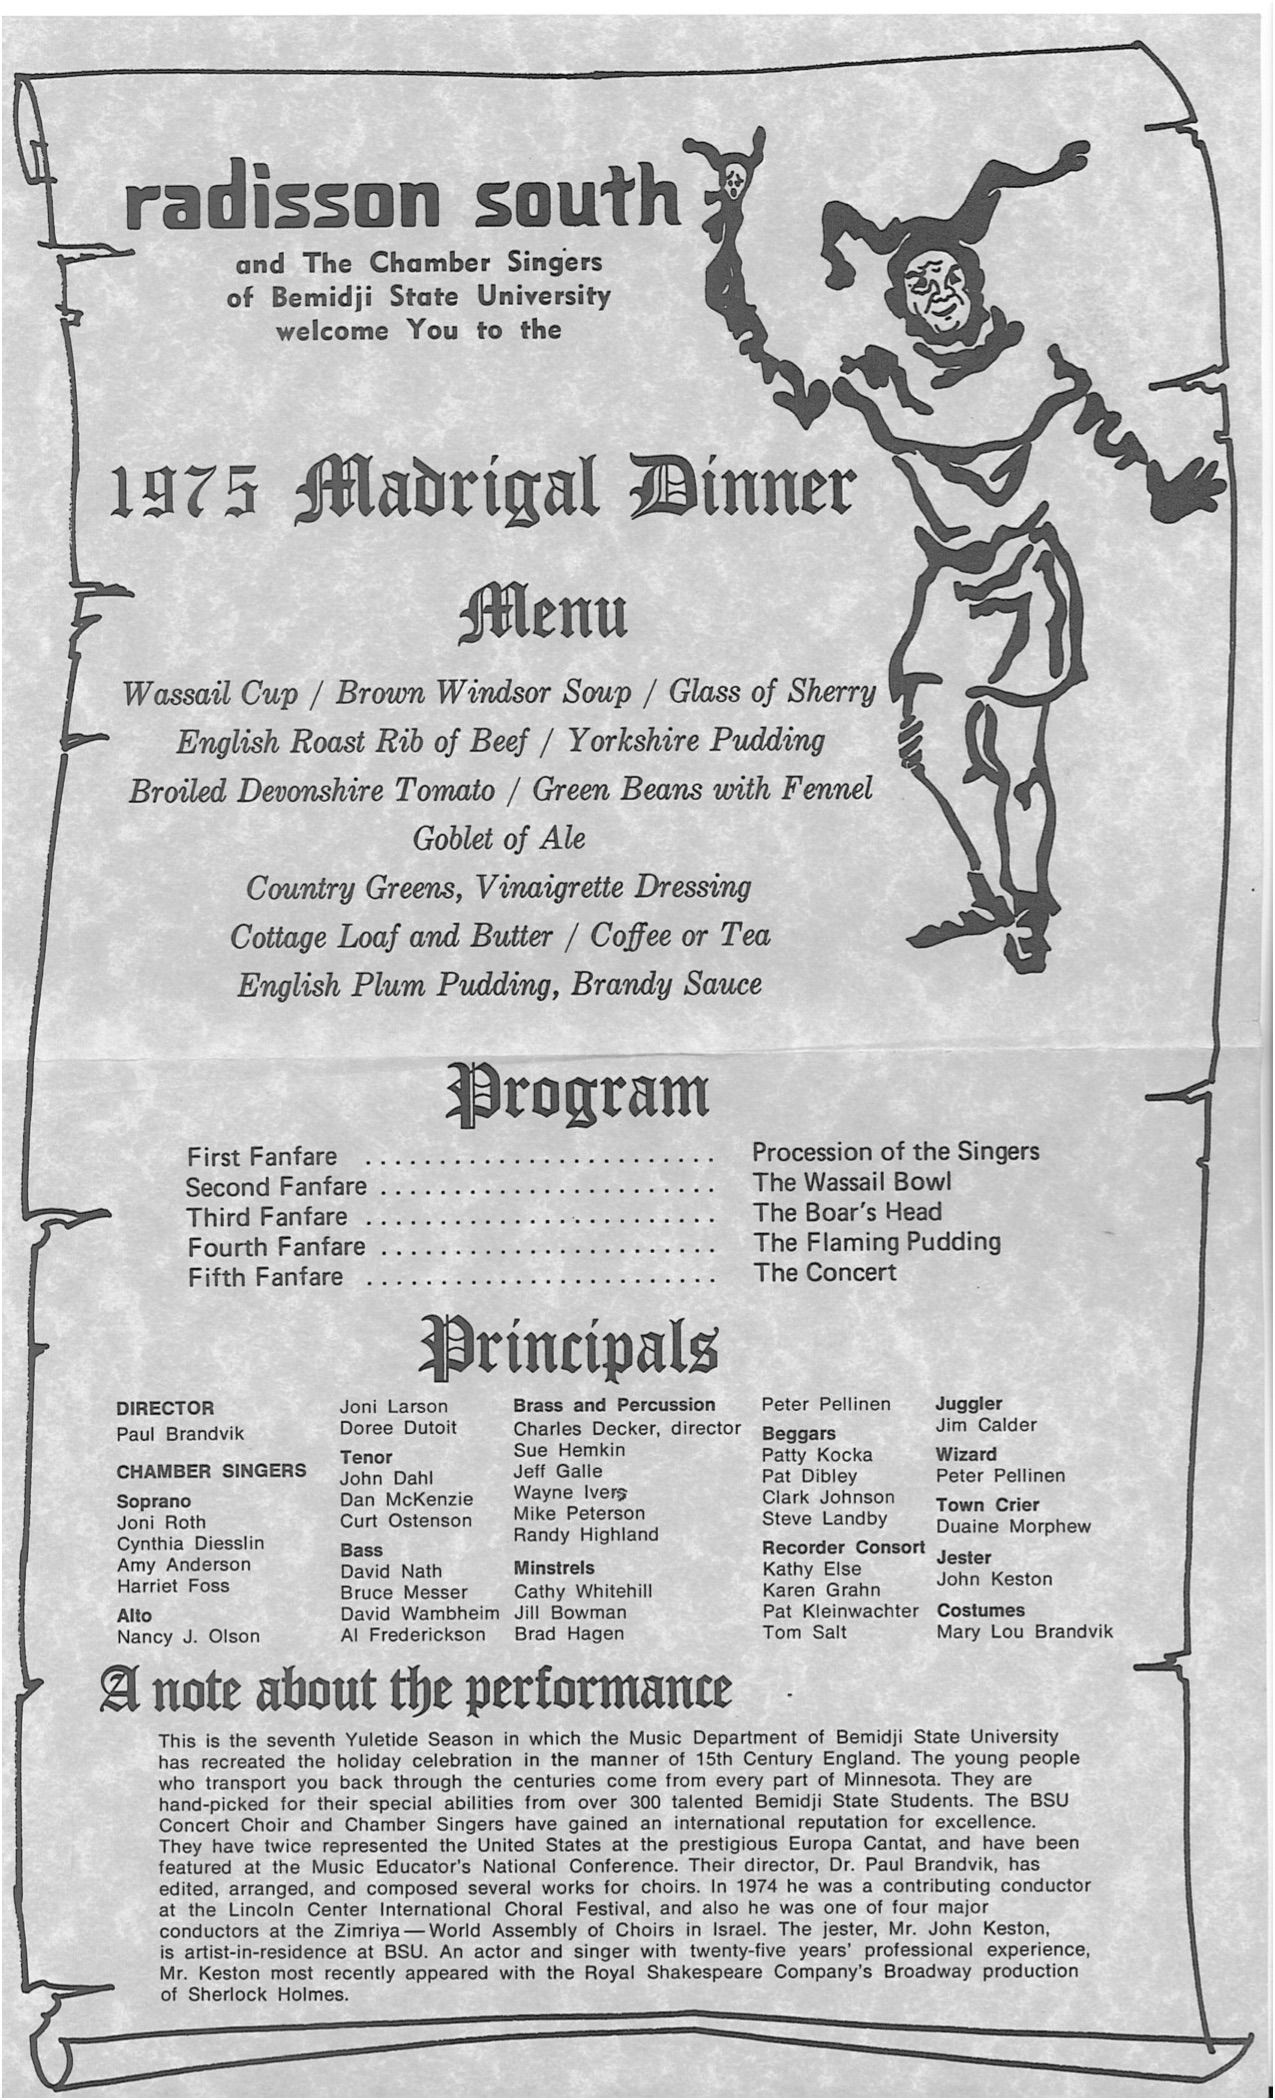 Seventh Annual Madrigal Dinner poster, 1975.